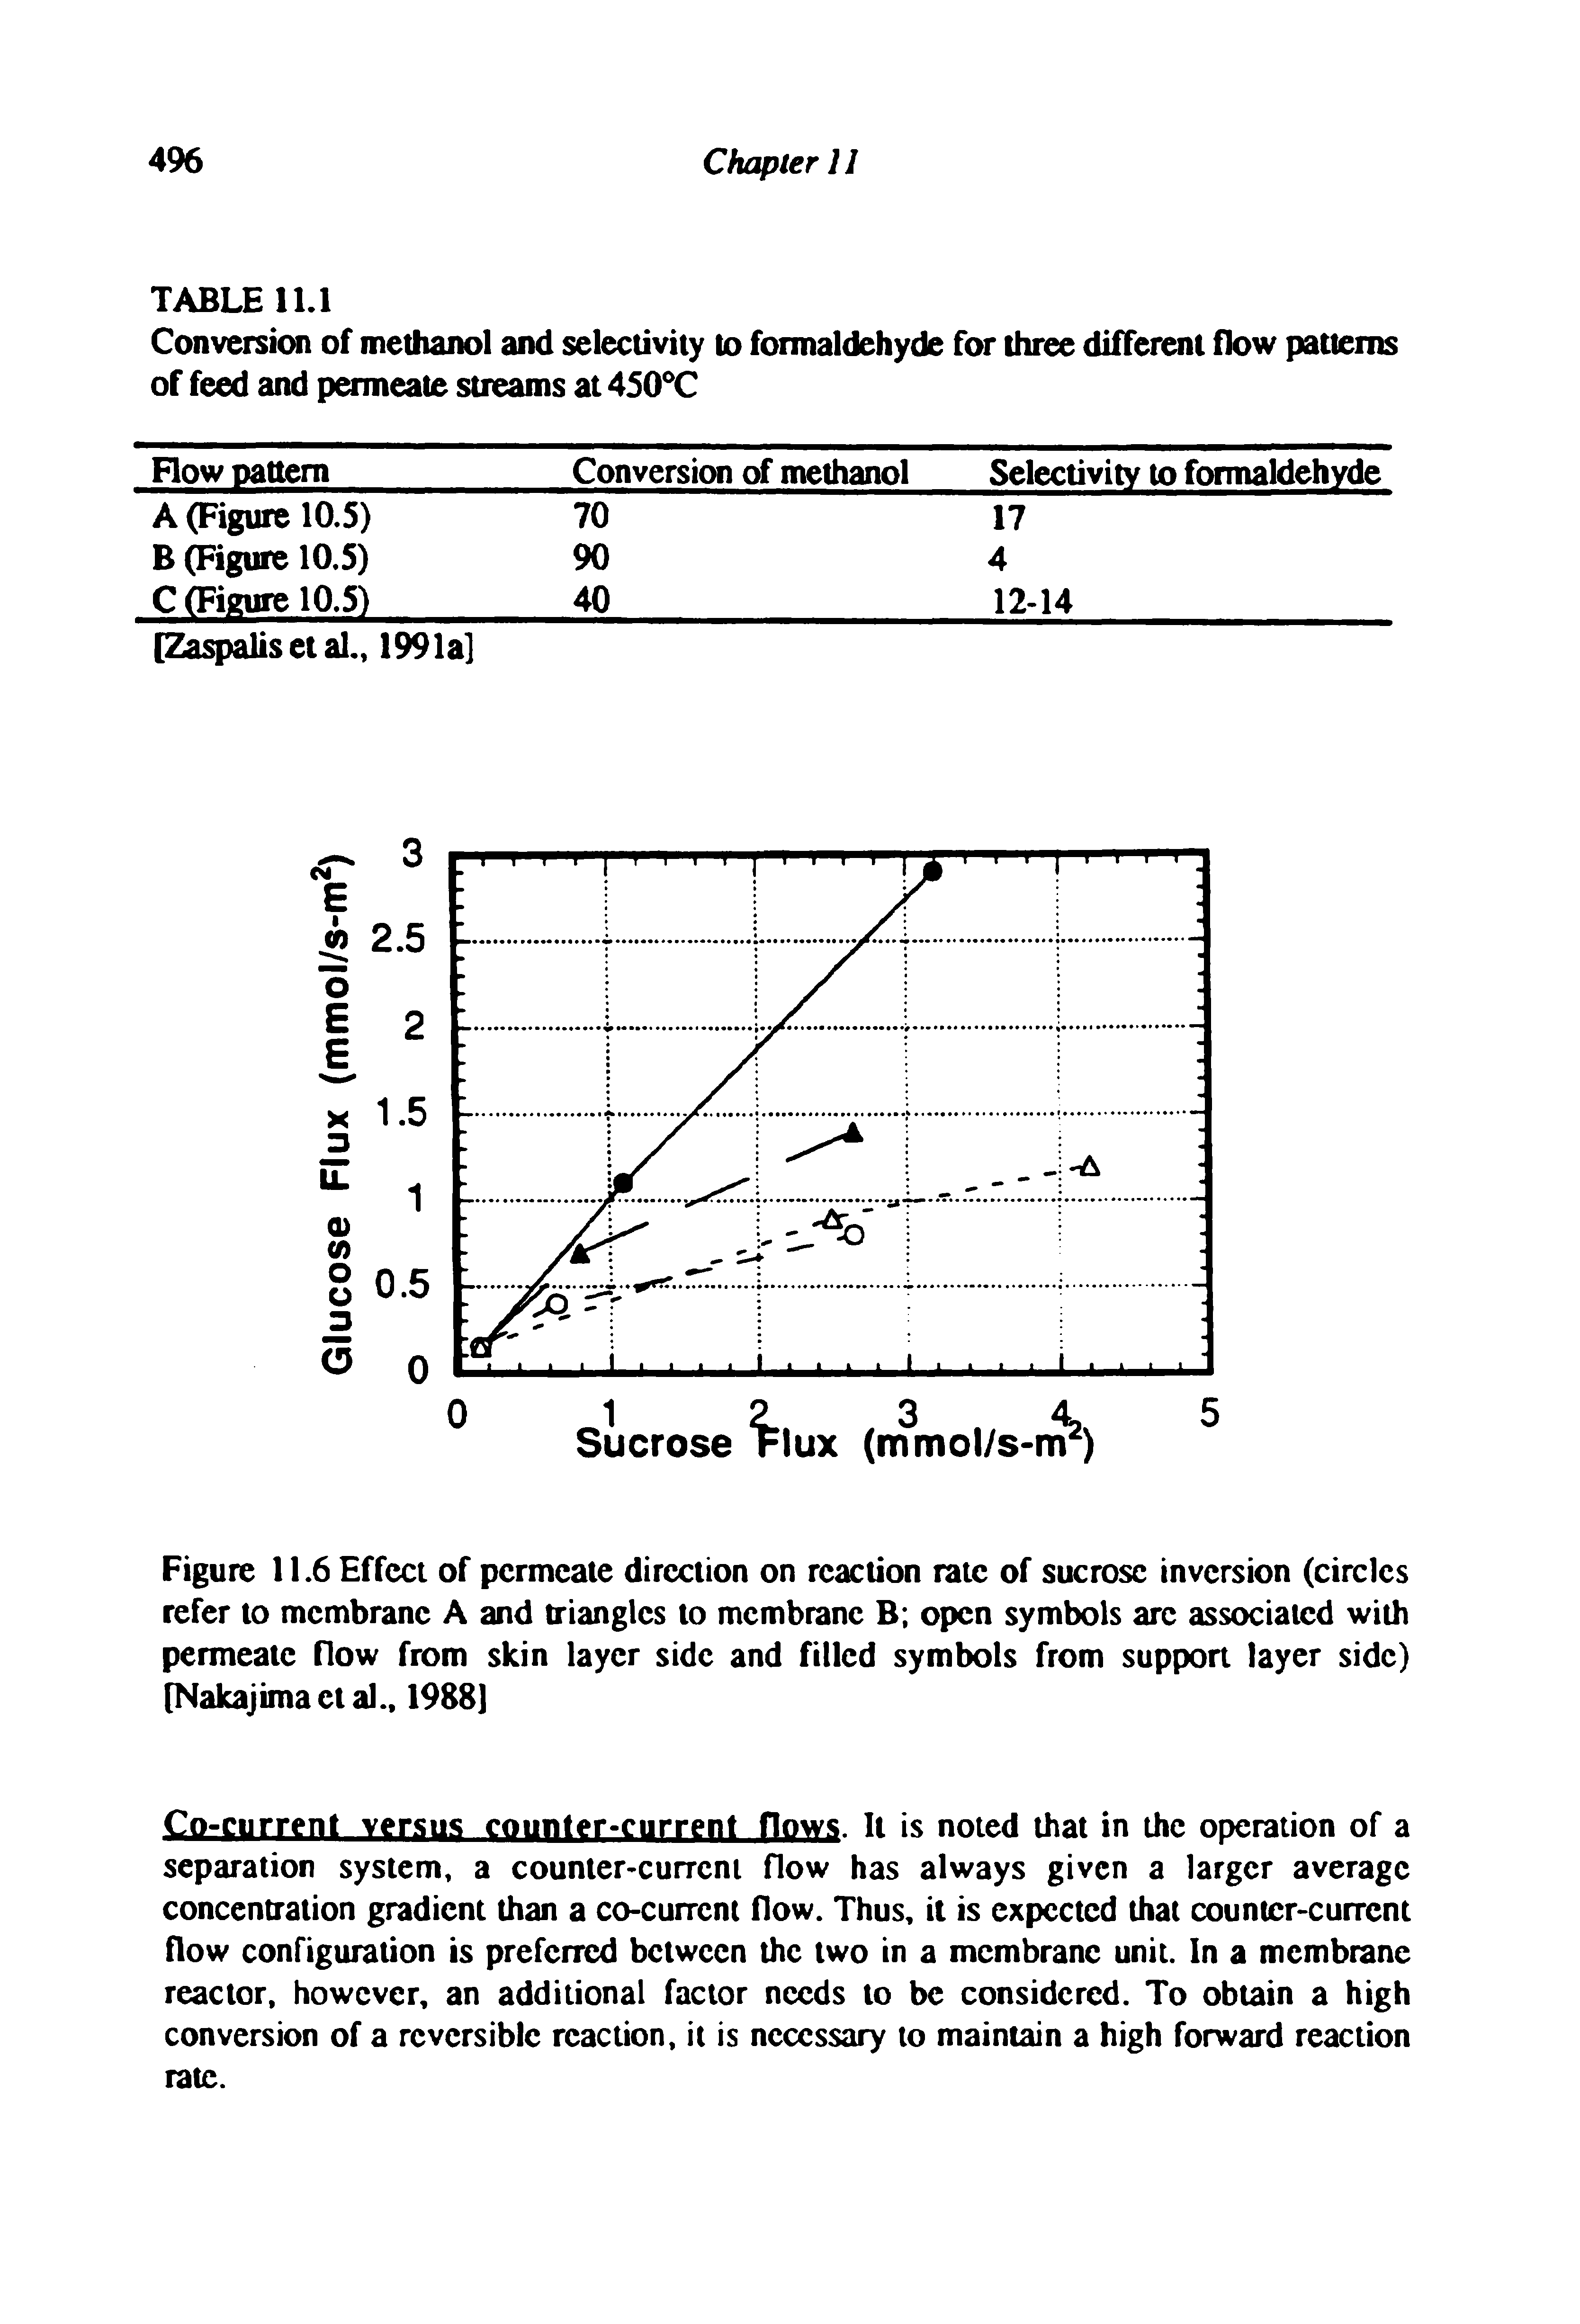 Figure 11.6 Effect of permeate direction on reaction rate of sucrose Inversion (circles refer to membrane A and triangles to membrane B open symbols are associated with permeate flow from skin layer side and filled symbols from support layer side) [Nakajimactal., 1988]...